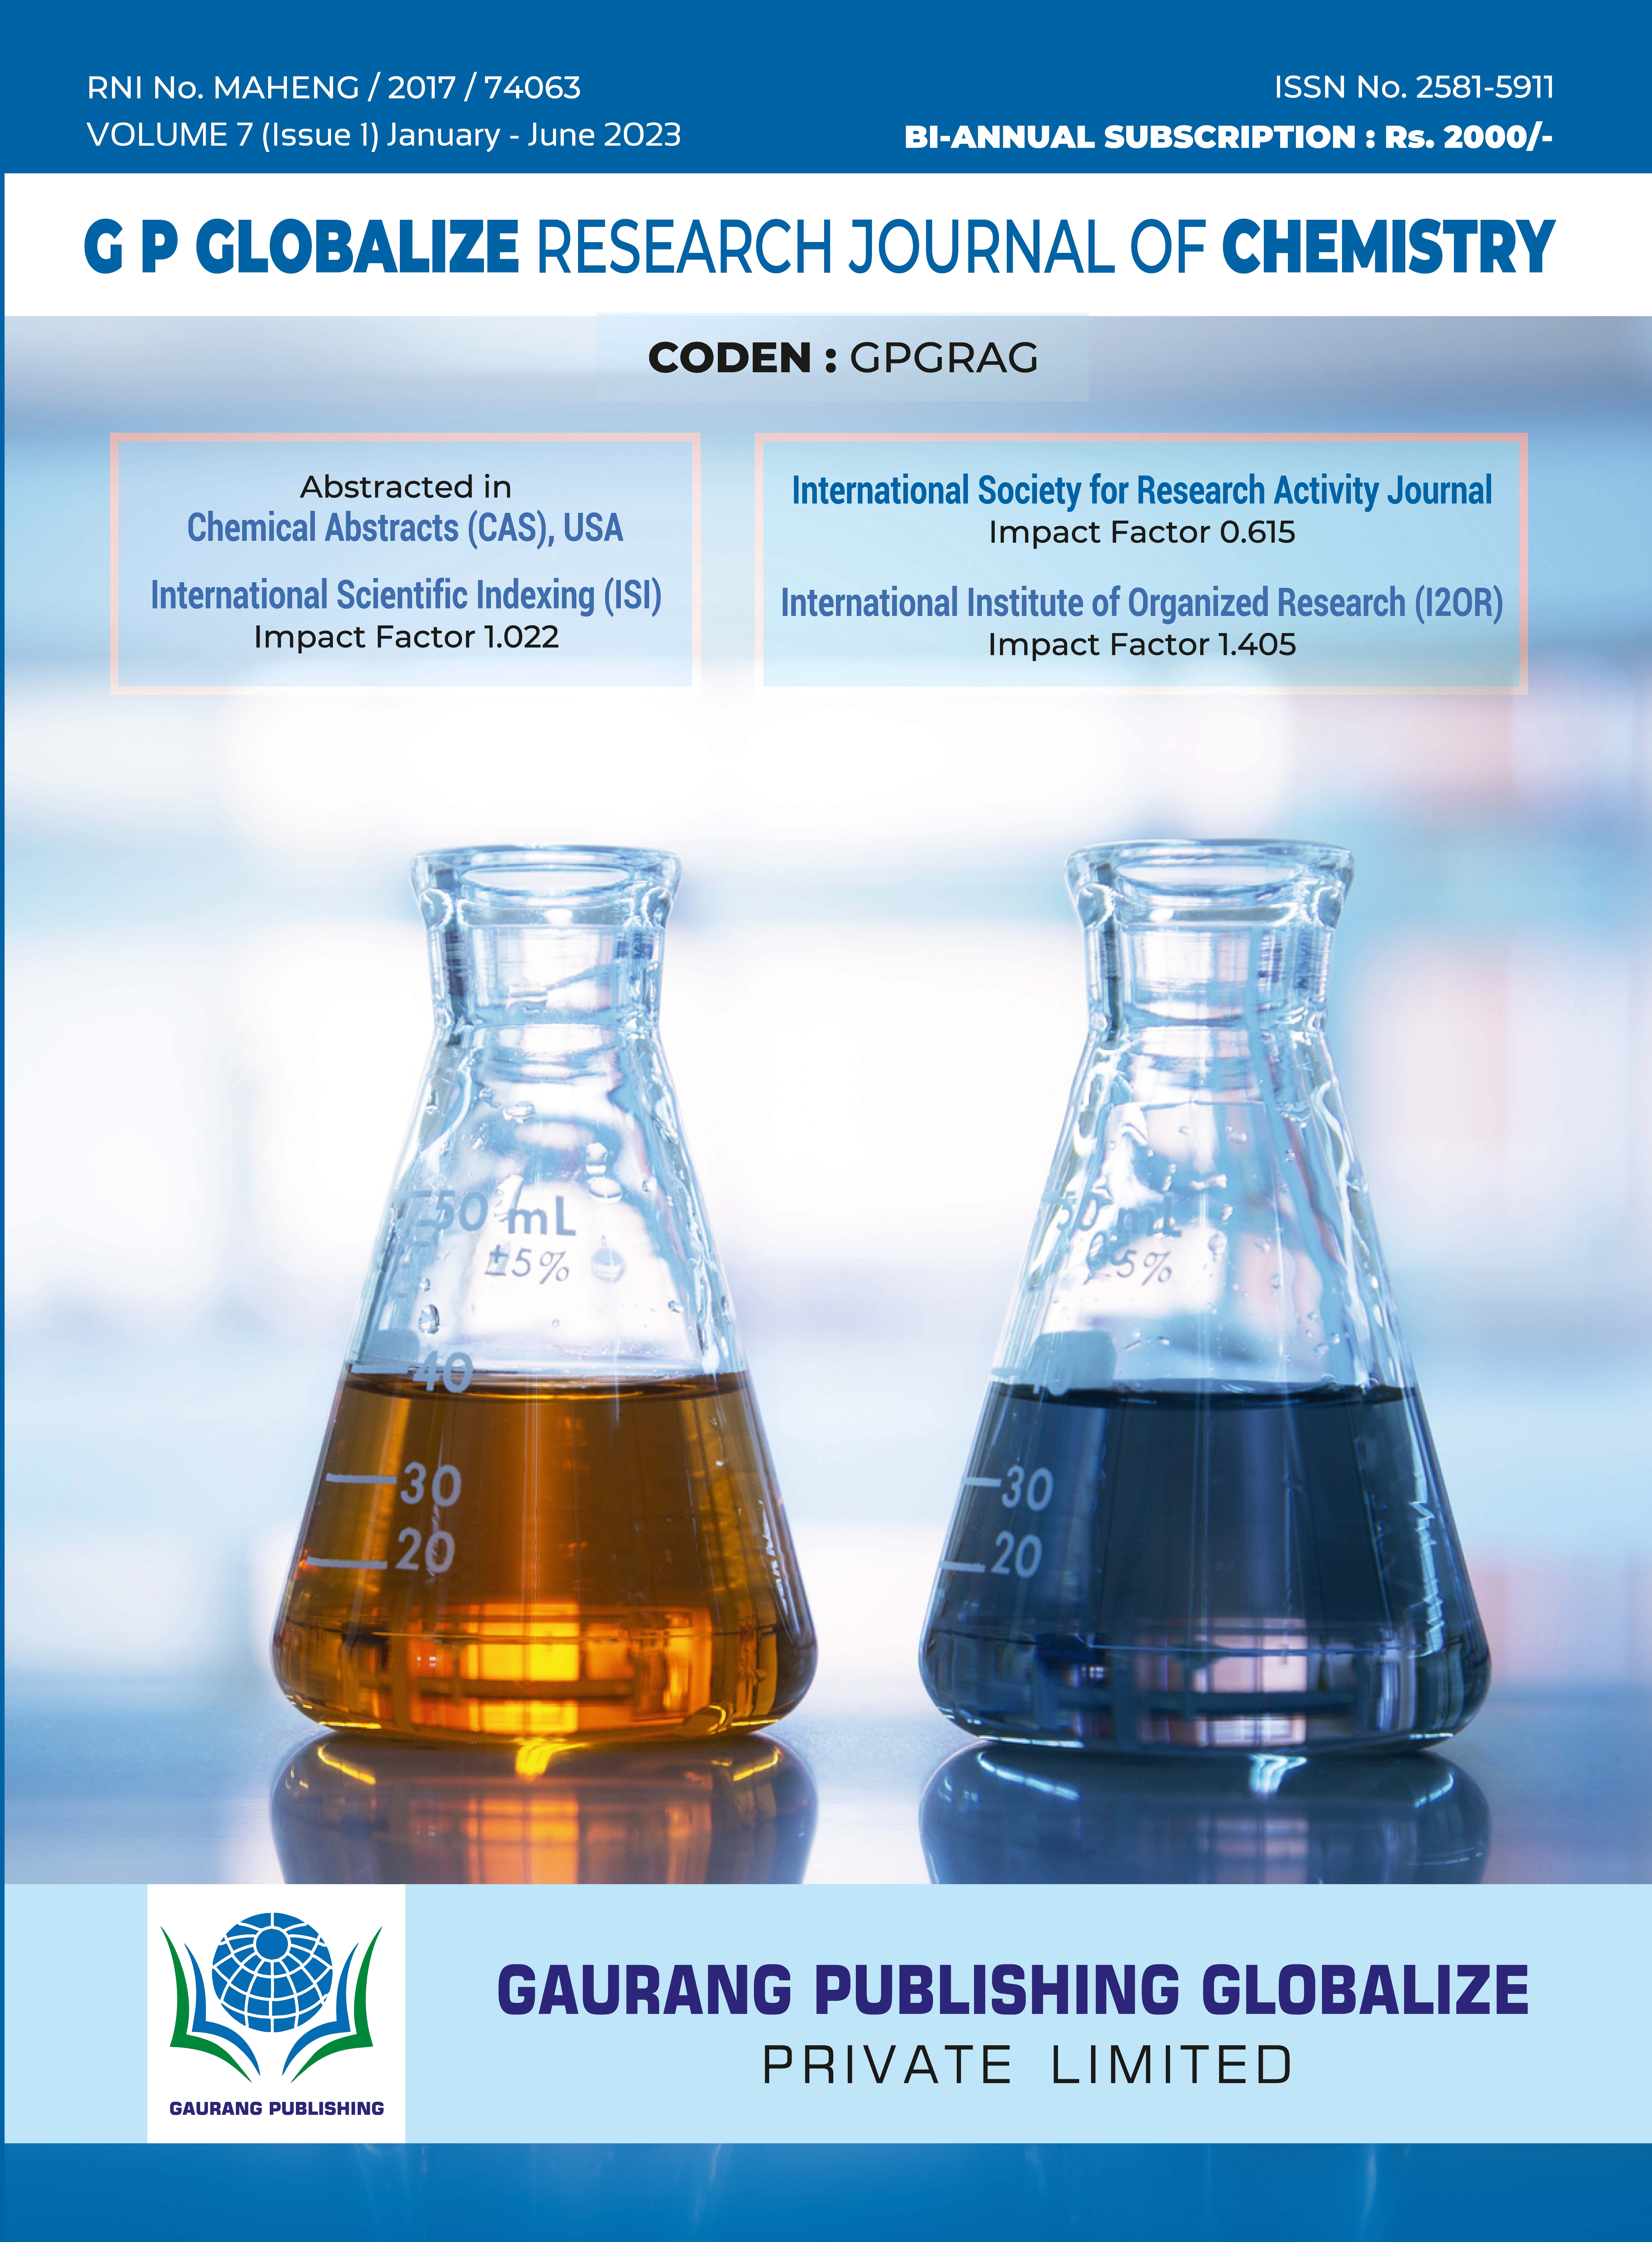 Chemistry Vol 7 Issue 1 January - June 2023